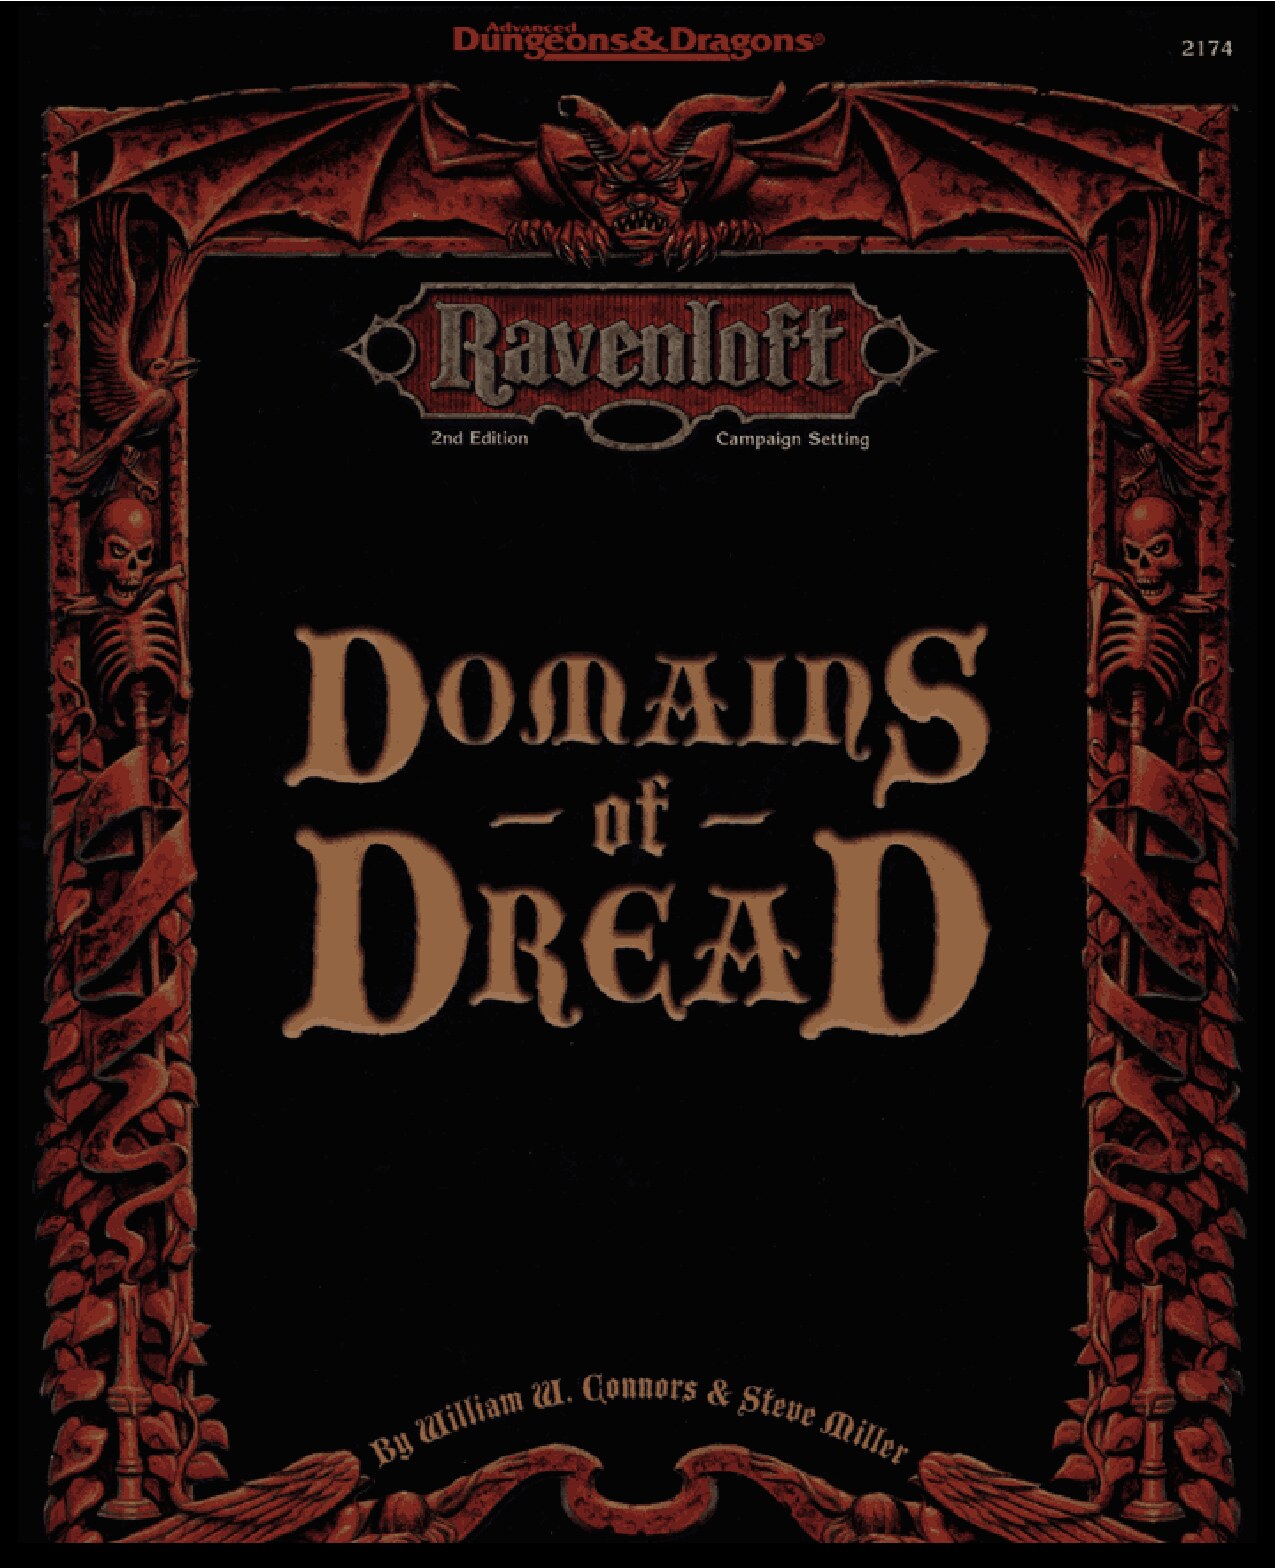 AD&D® 2nd Edition Domains of Dread€- Ravenloft Campaign Setting